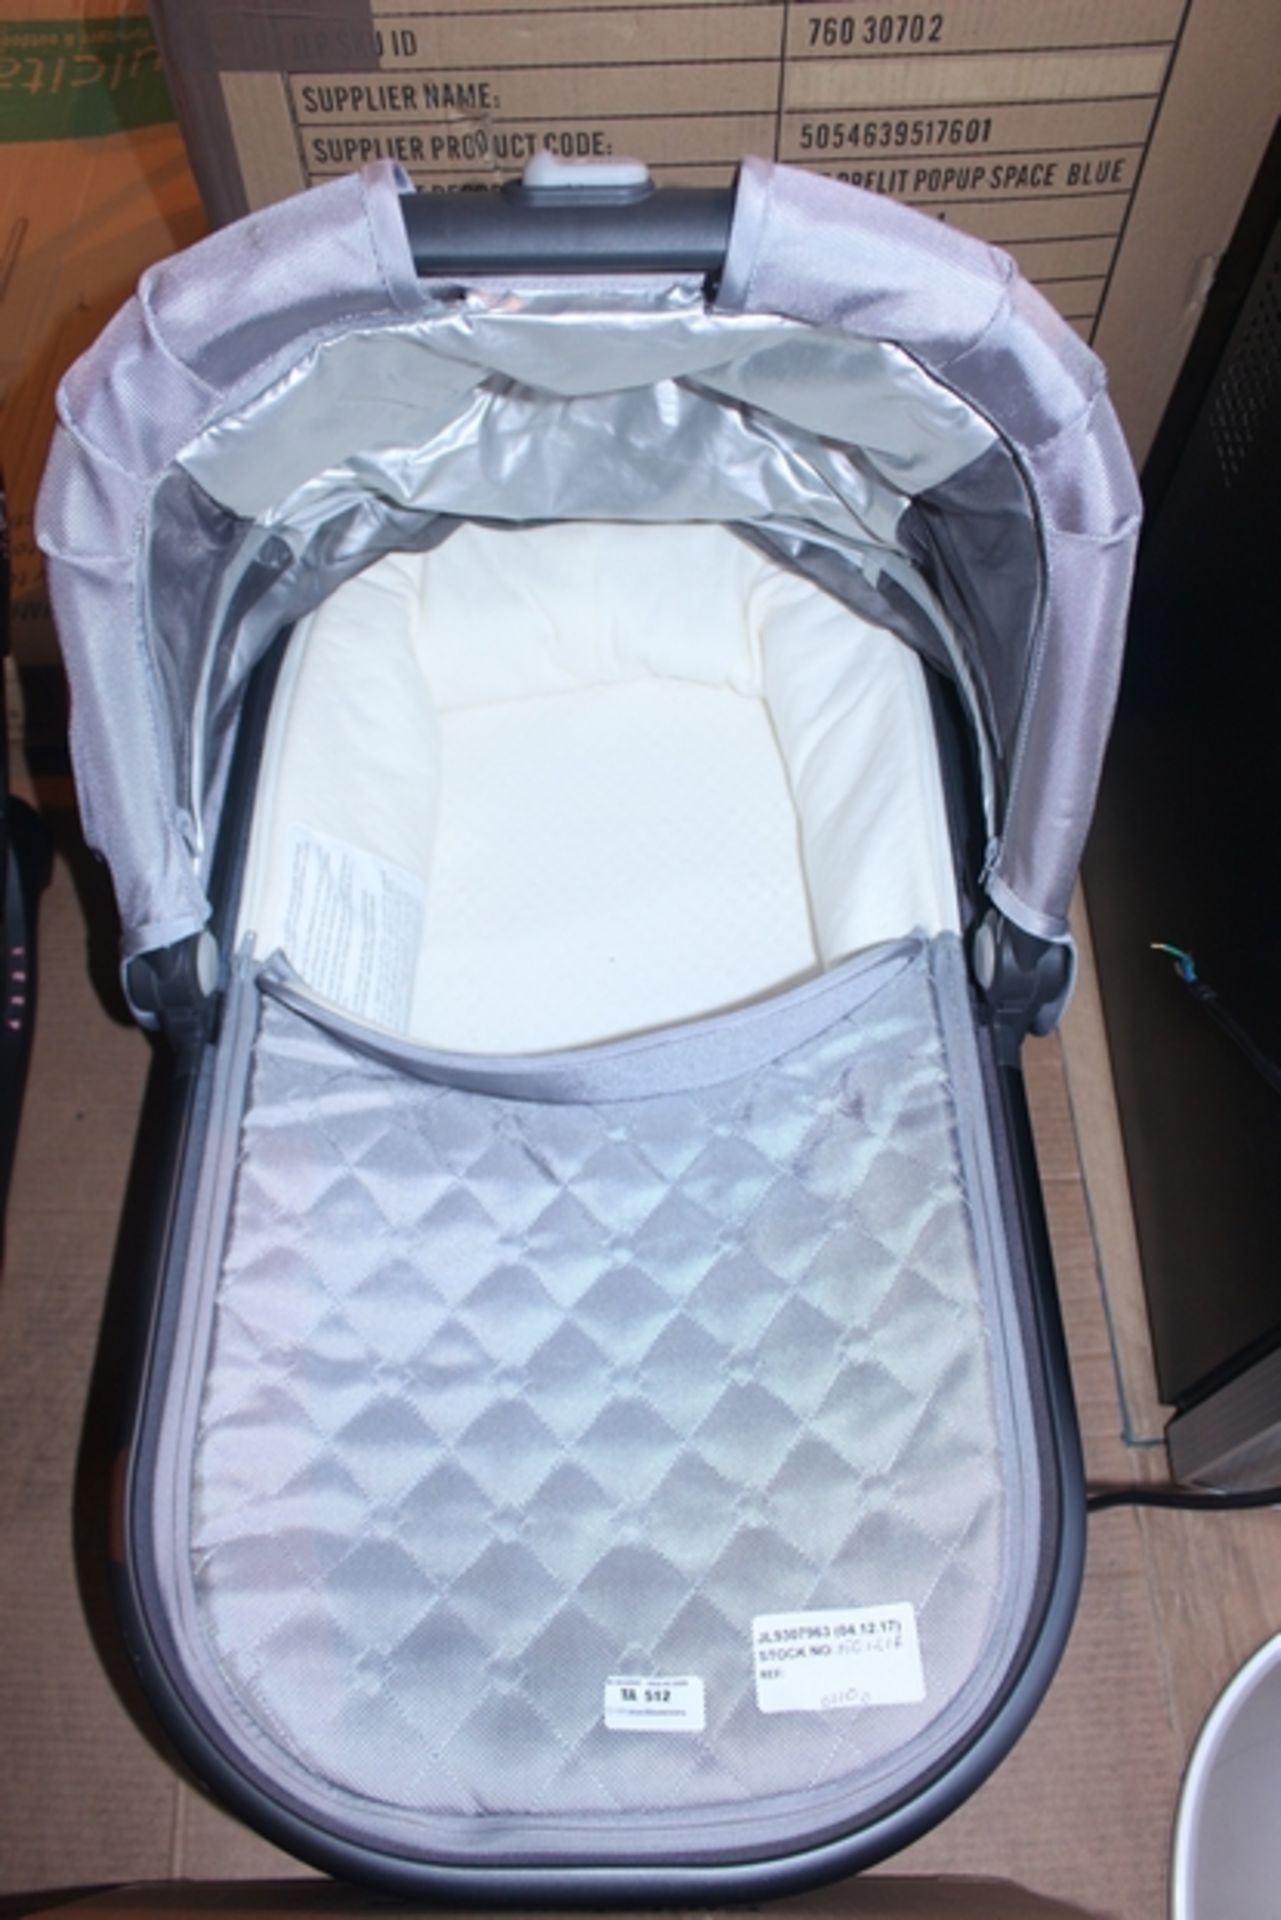 1X UPPA BABY CARRY COT RRP £110 (JL-9307963) (04/12/17) (1501217)